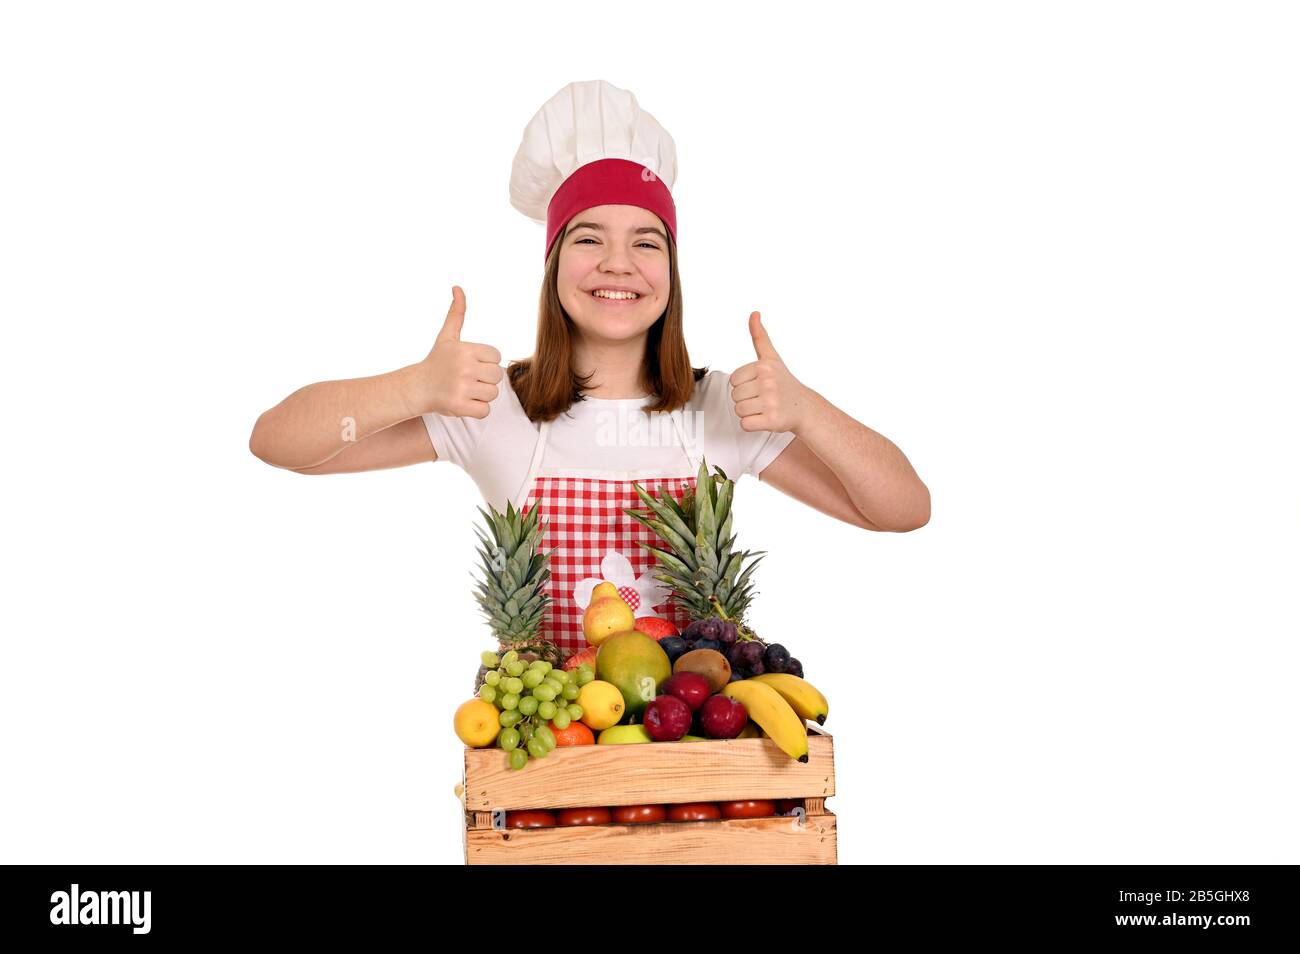 female cook with fruit and thumbs up Stock Photo